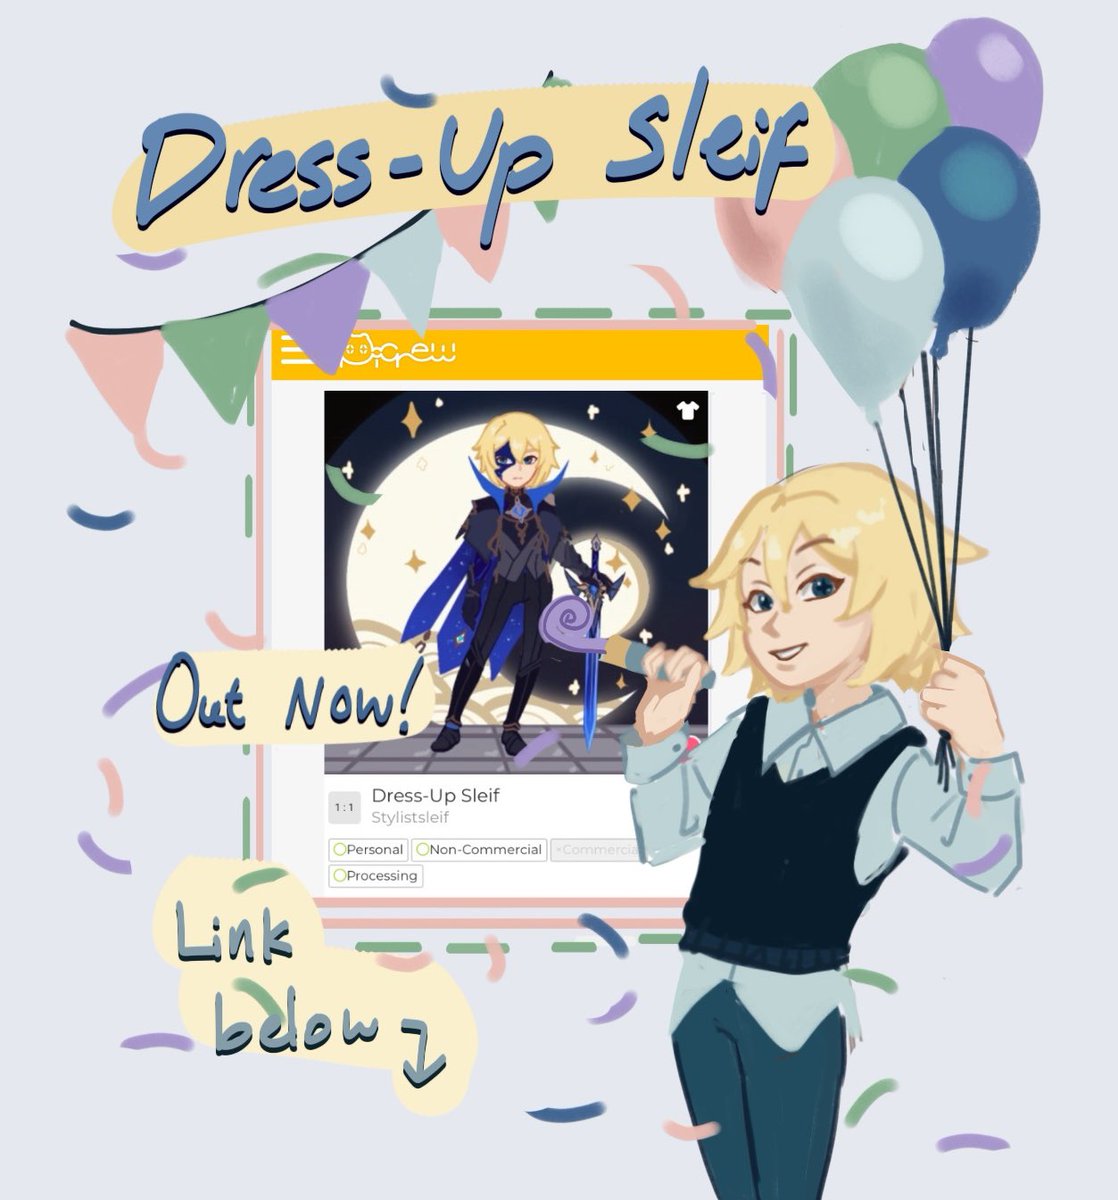 💙 Dress-Up Sleif is now live!!! 💙 A huge thank you to @Sumeru_Sevi, @TanimilArt, @Lum1nace, @adamgozarapido, @velvetsnaiil, @ronvindr, @EstreaWilliams and @kimeoshi for all their wonderful contributions! Use #DressUpSleif to share your creations with everyone Link below!⬇️